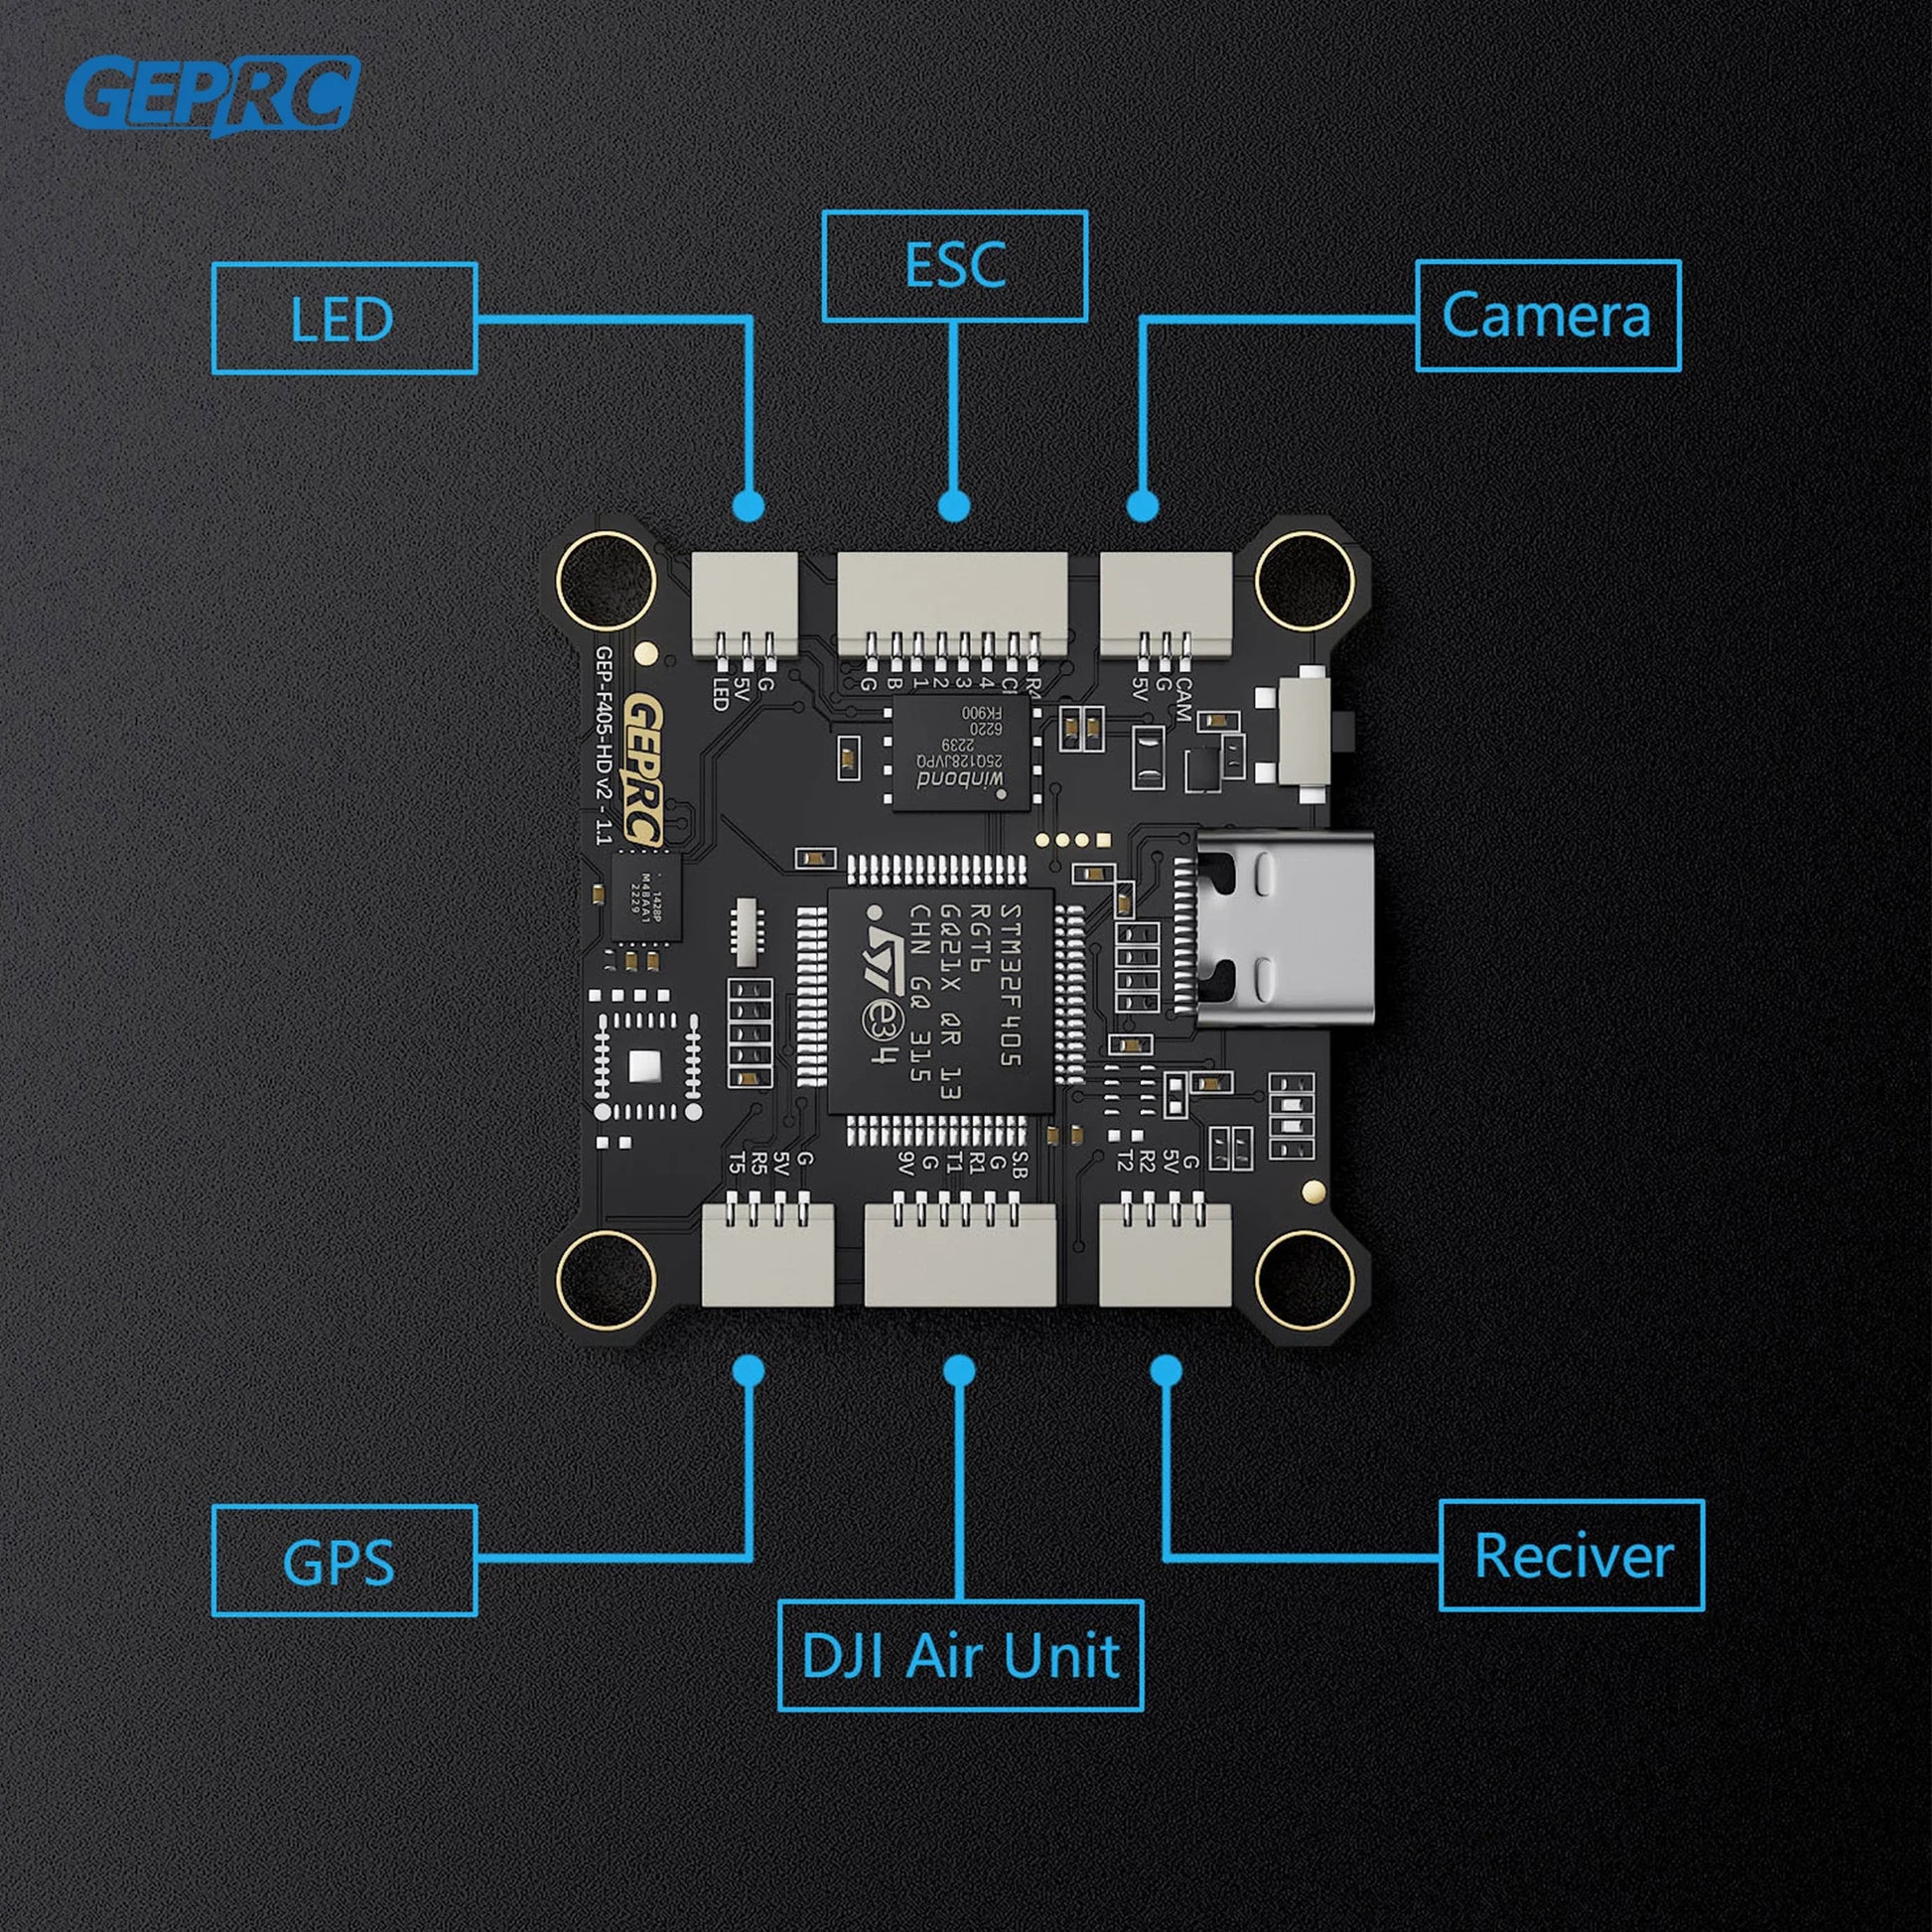 GEPRC TAKER F405 BLS 50A Stack - 42688-P Gyroscope 16MB  Black Box Data Analyze Record Flight Data Plug and Play Racing FPV Drone